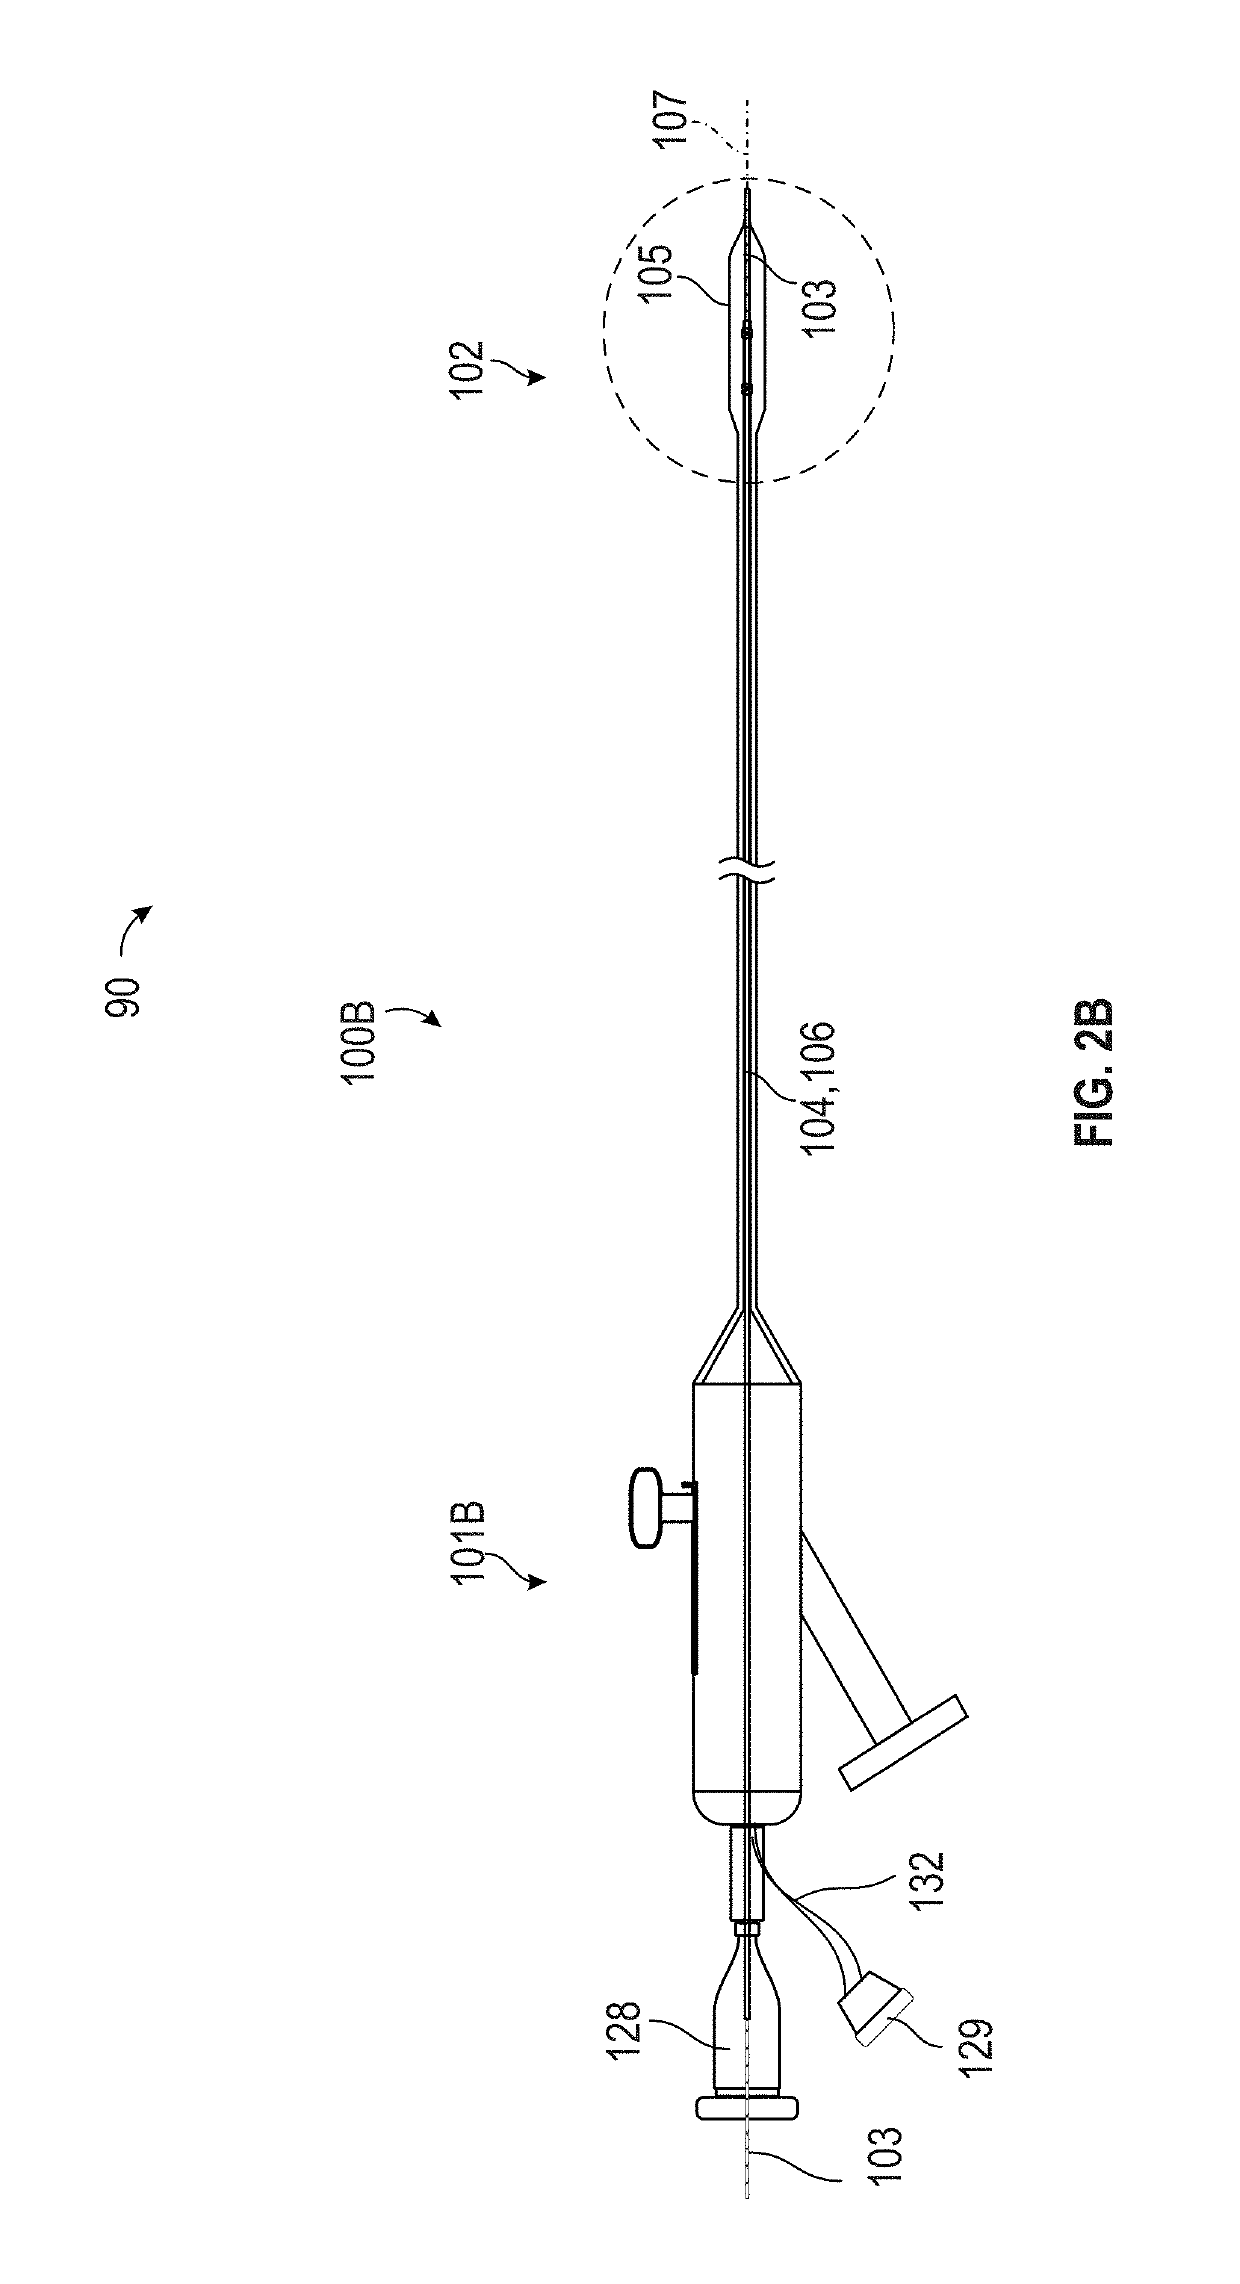 Shock wave balloon catheter with insertable electrodes